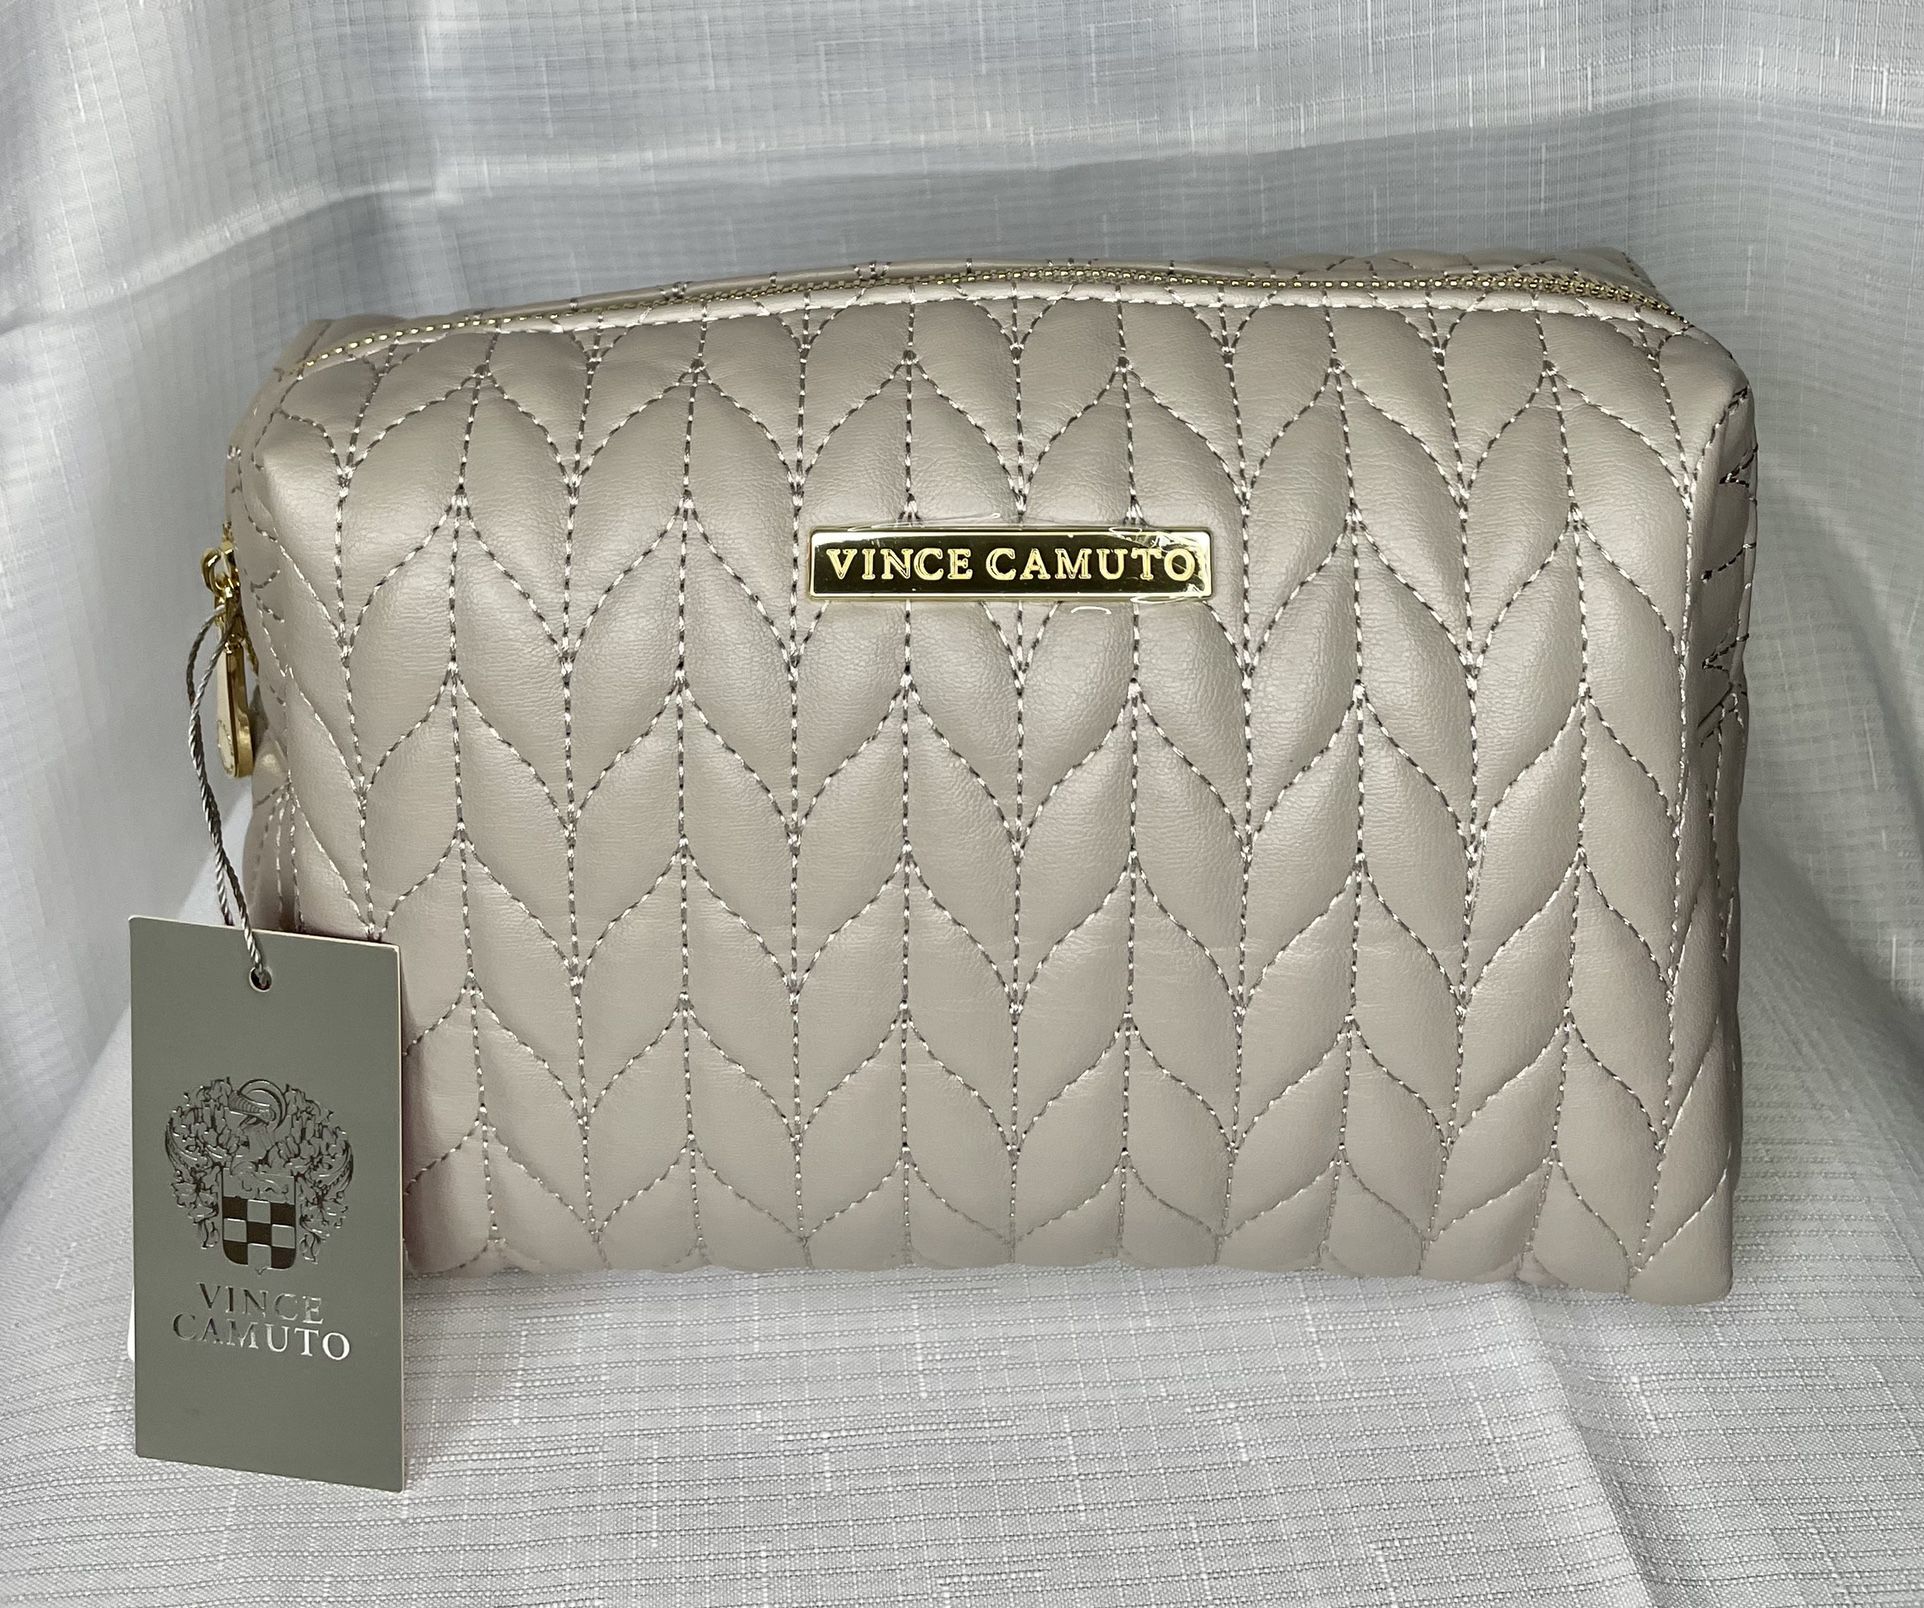 Vince Camuto Bag for Sale in Garden City South, NY - OfferUp